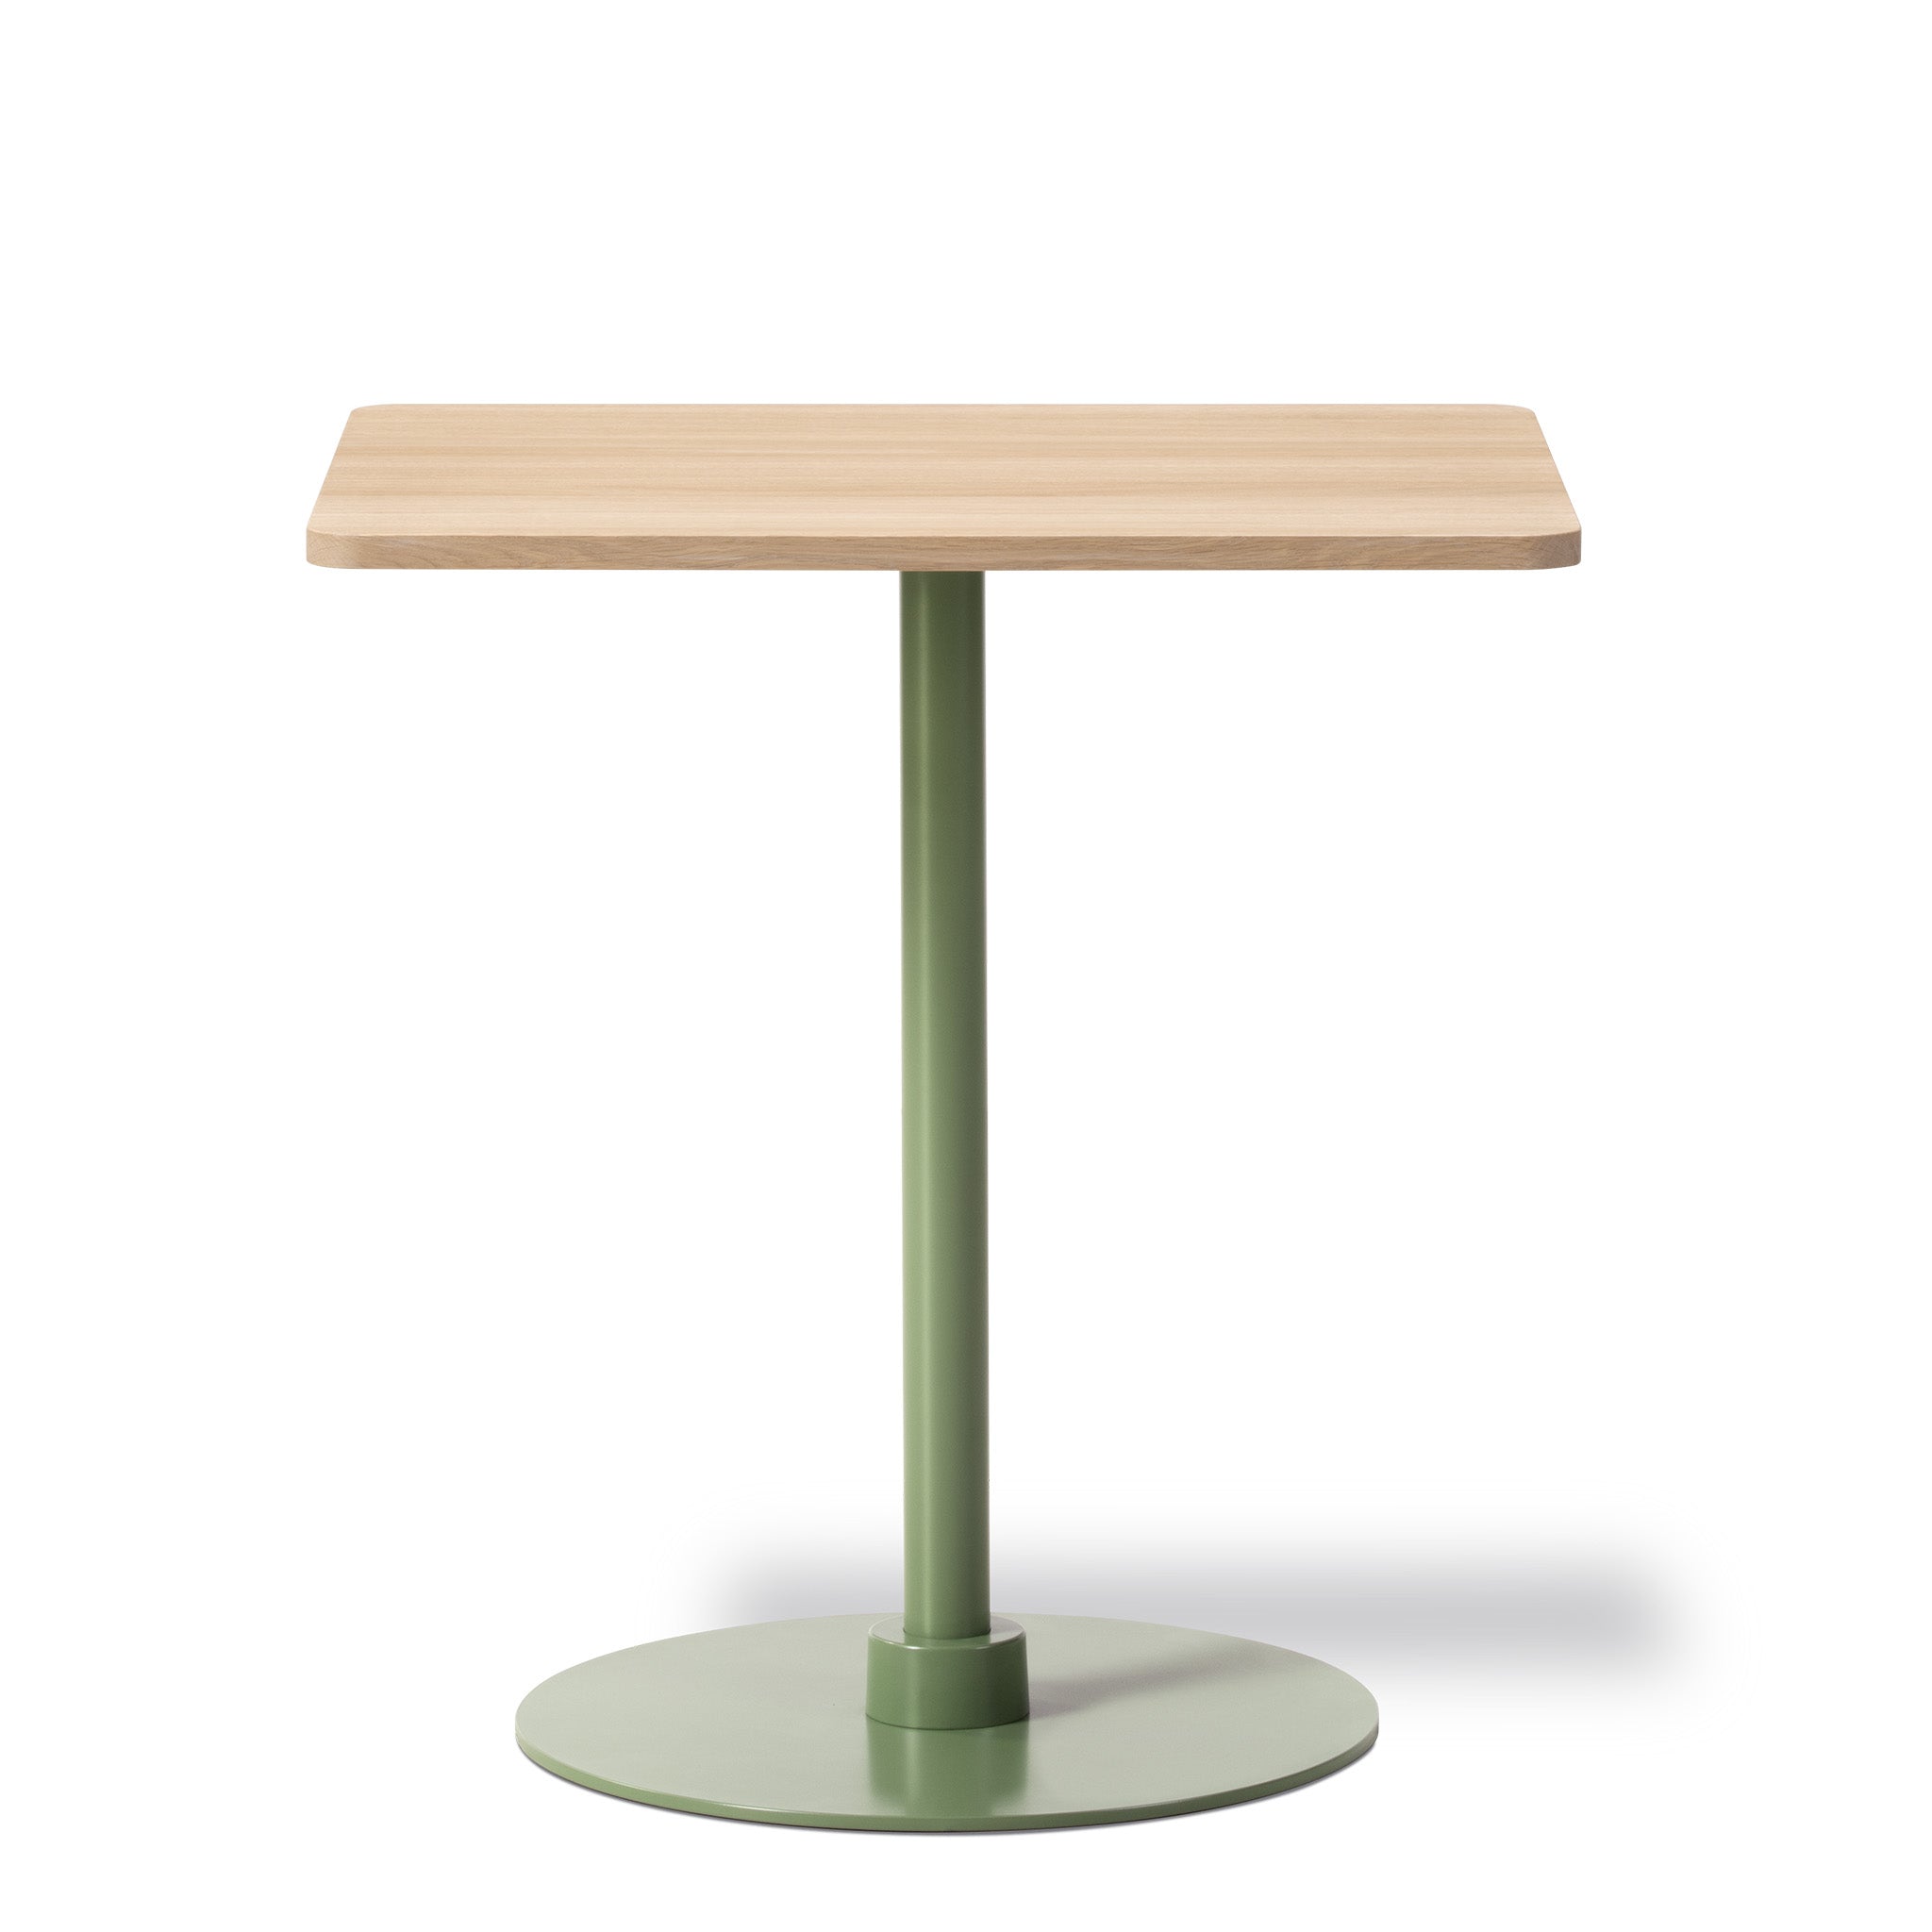 Plan Column Table by Fredericia